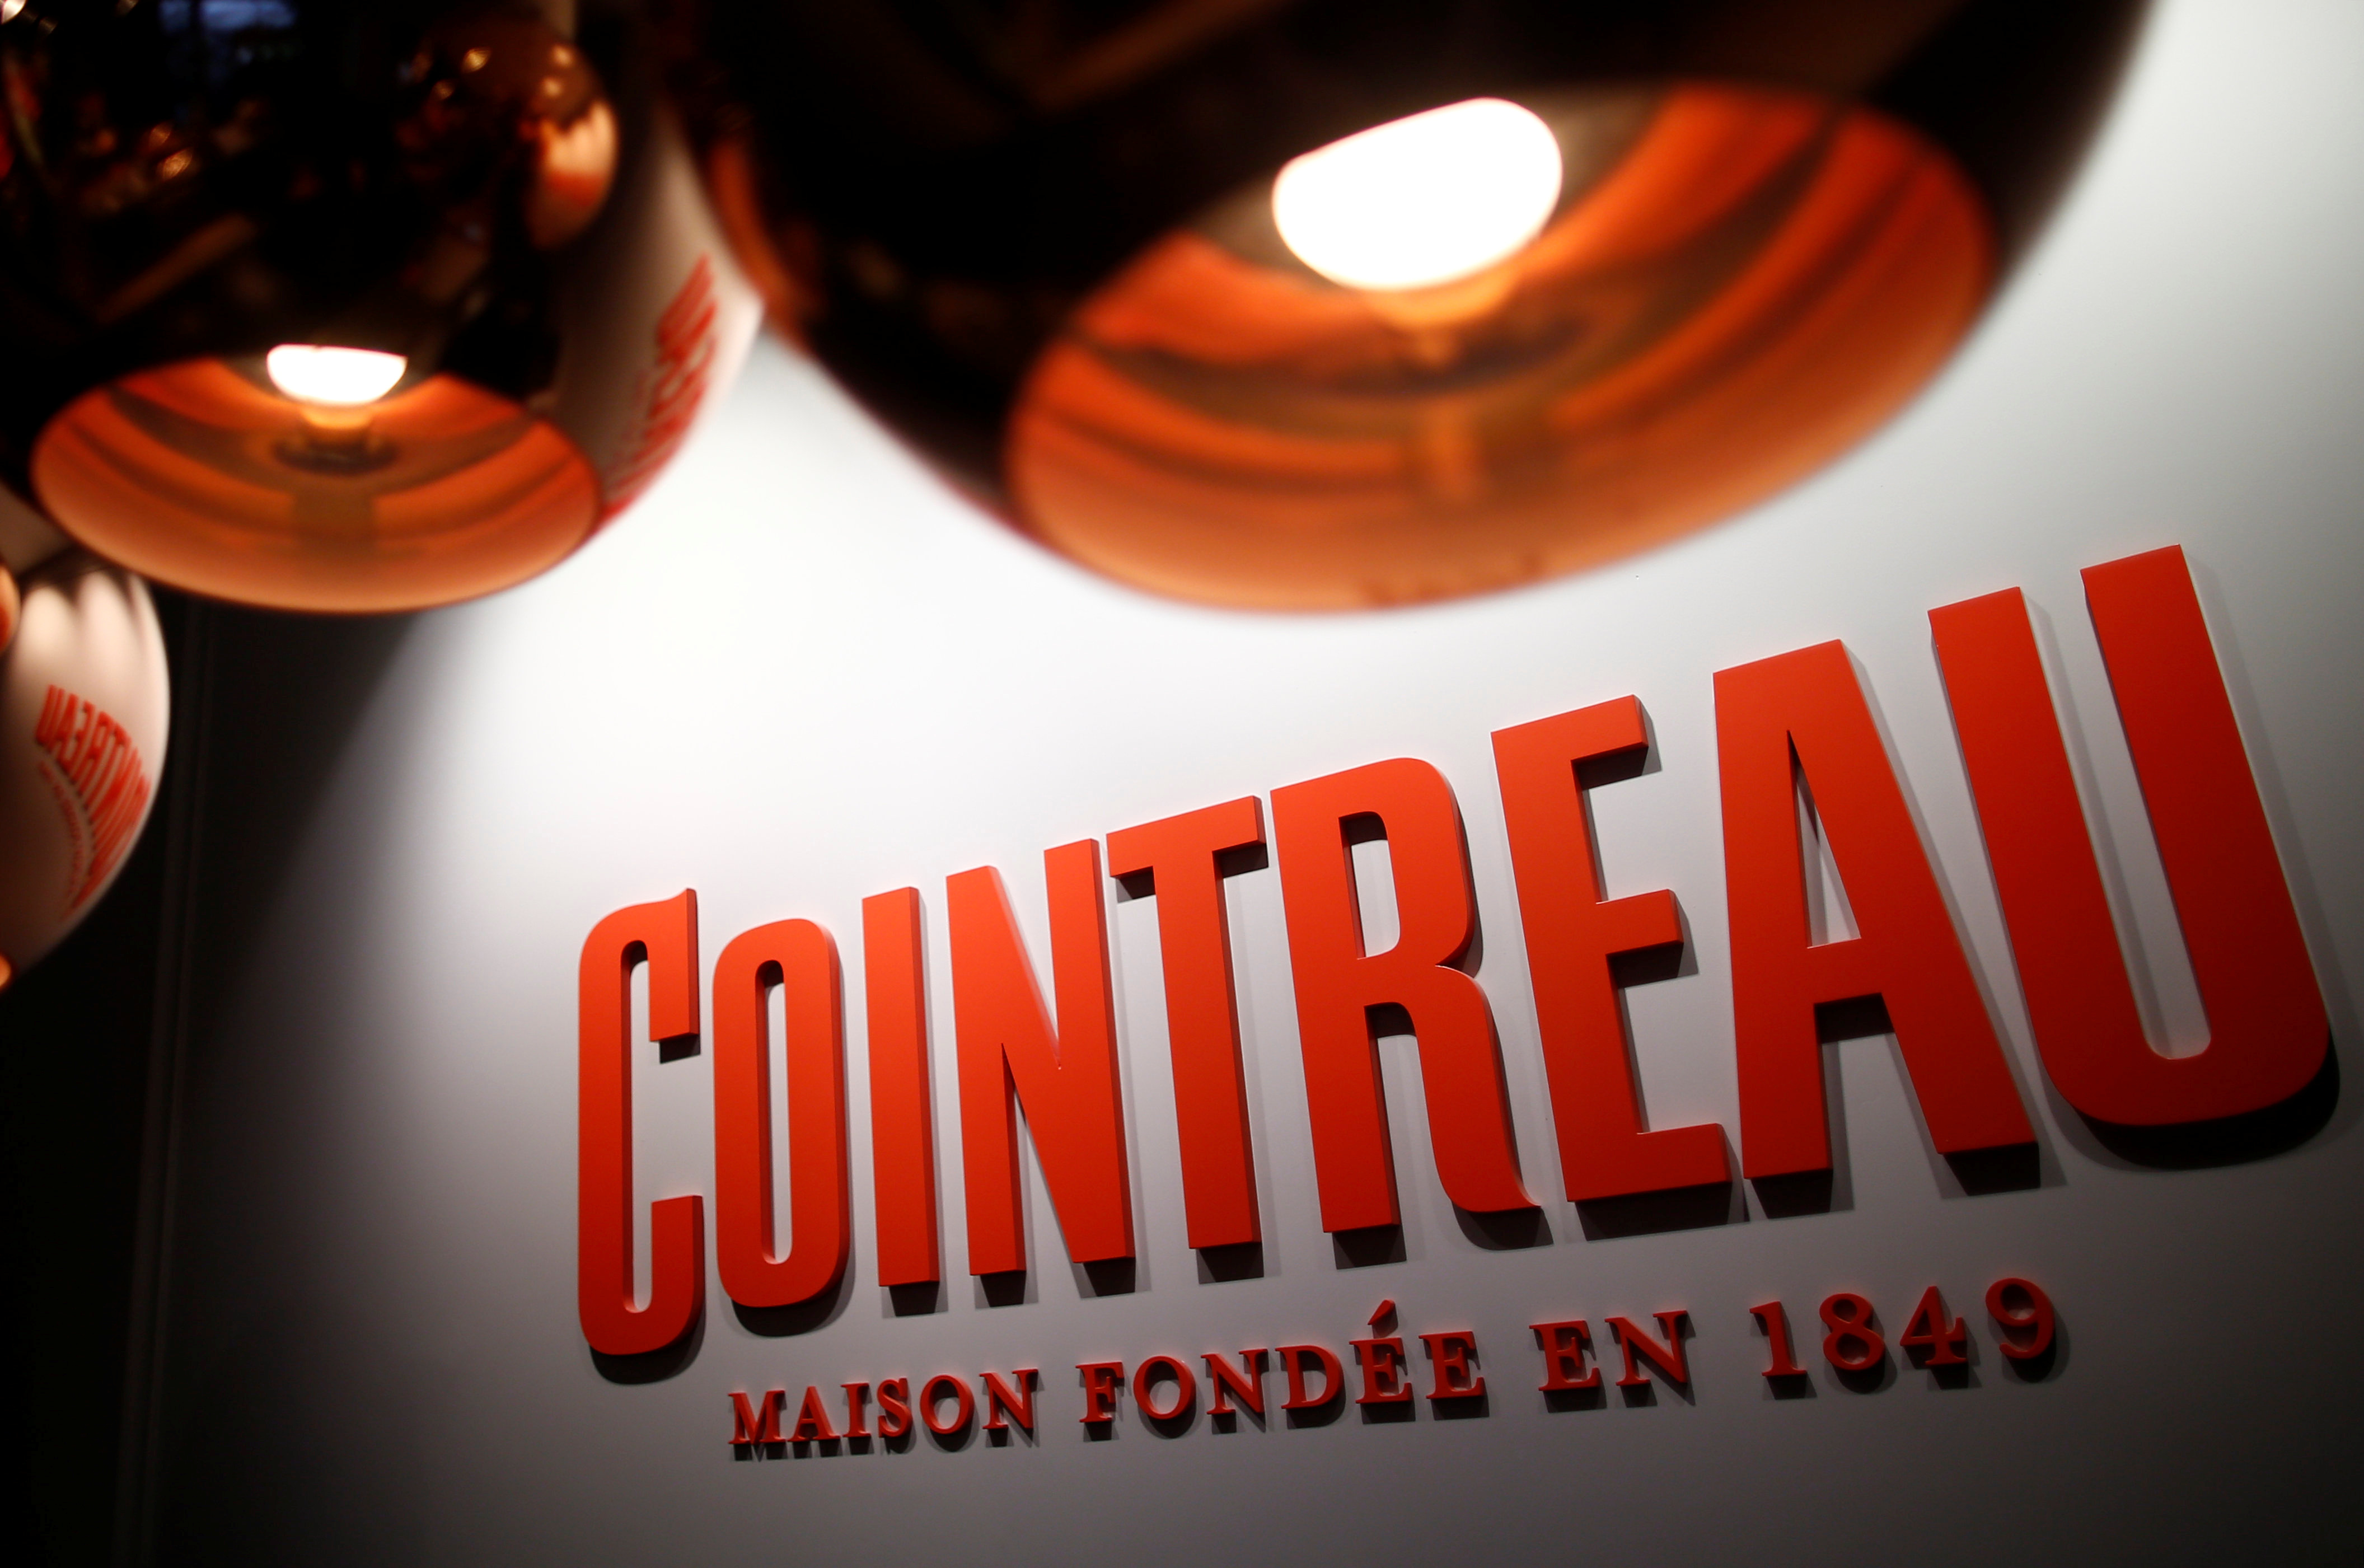 The logo of Cointreau is seen at the Carre Cointreau in the Cointreau distillery in Saint-Barthelemy-d'Anjou near Angers, France. REUTERS/Stephane Mahe